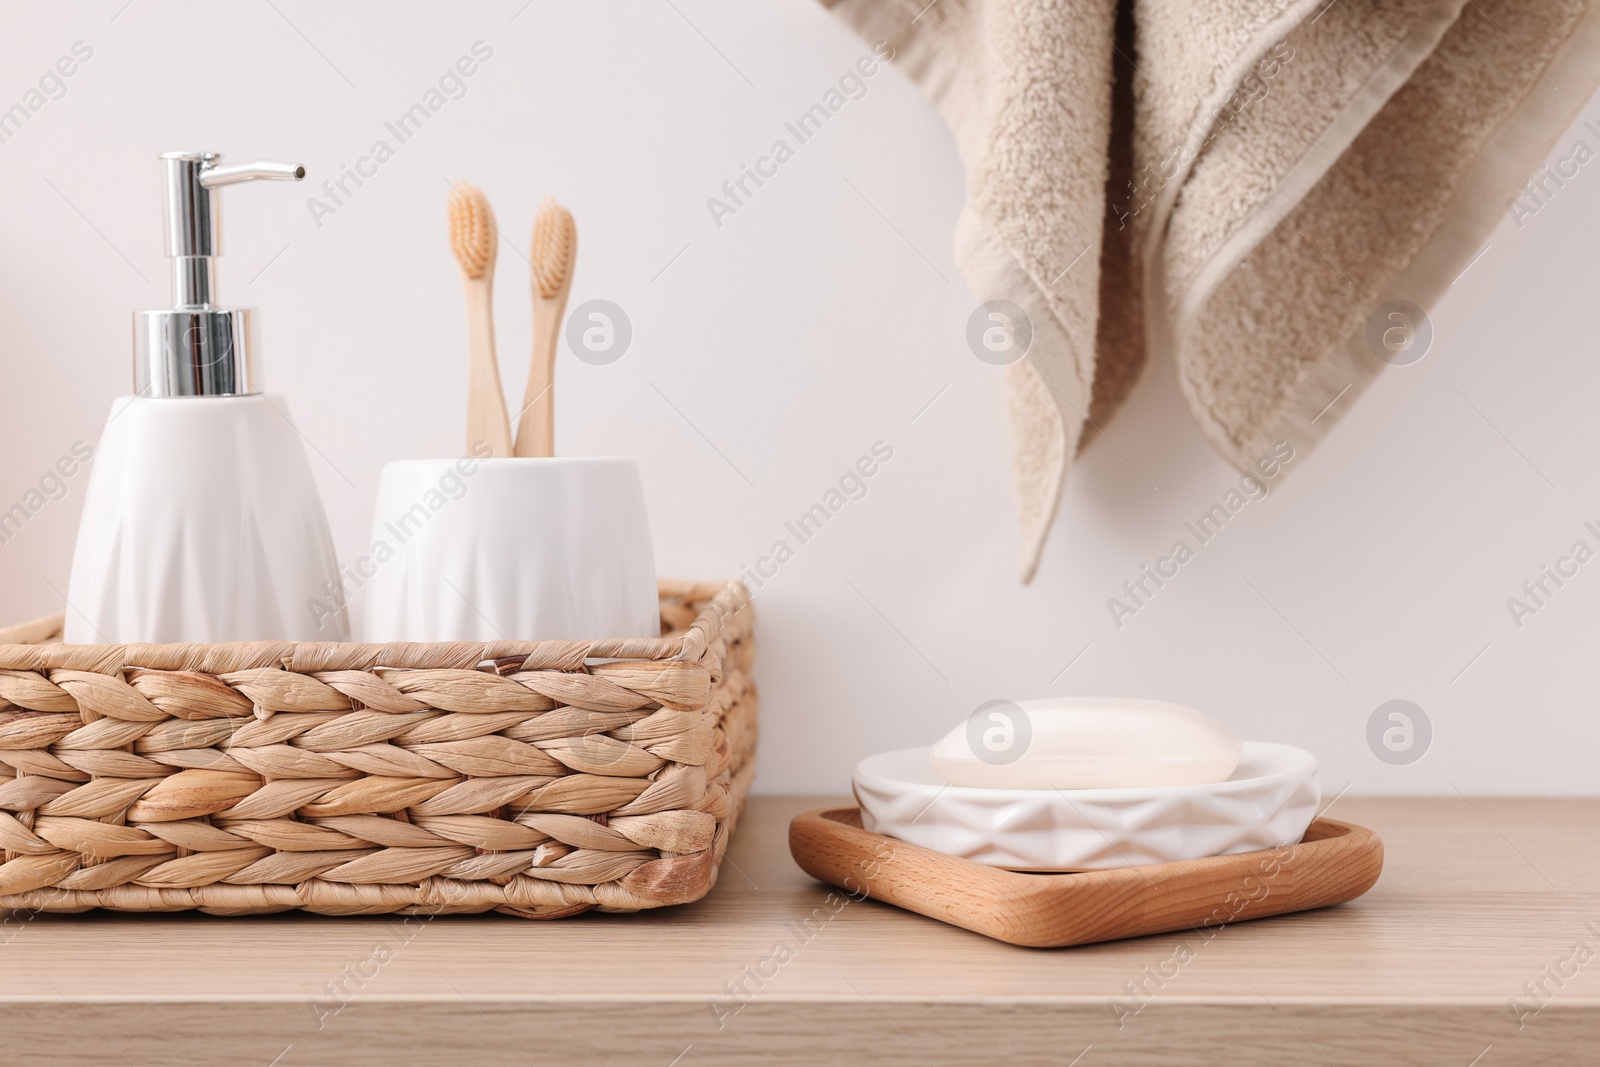 Photo of Different bath accessories and personal care products indoors